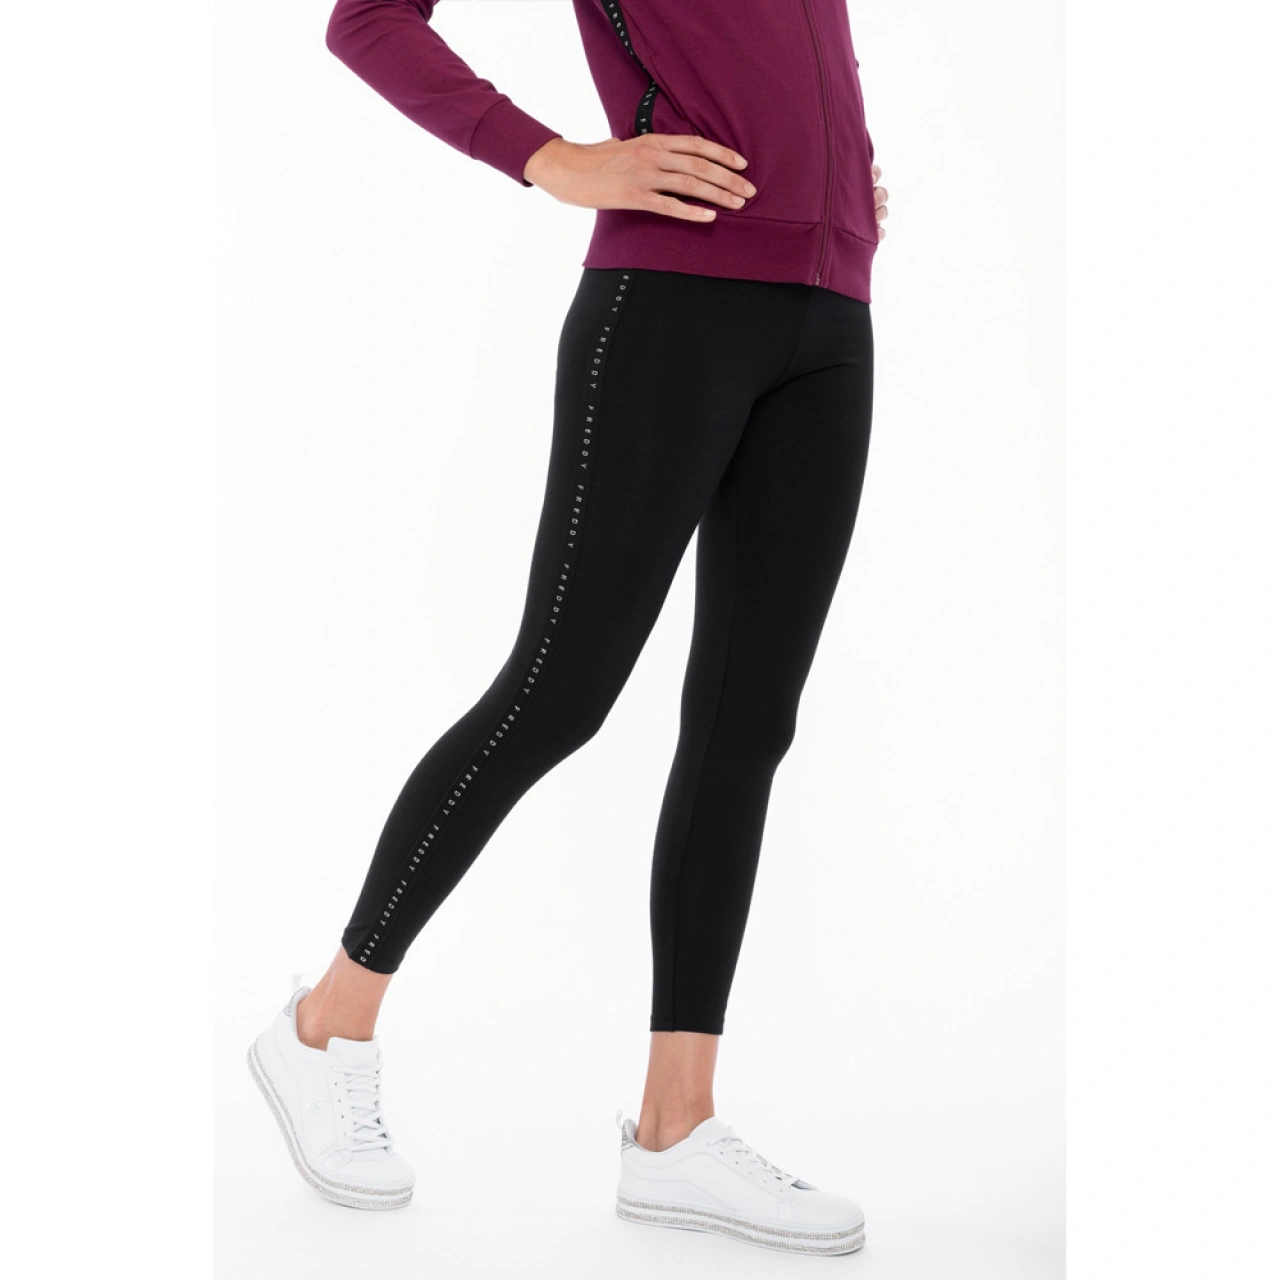 Freddy Leggings with a decorated black lateral band - F0WBCP5-N - Spot Team